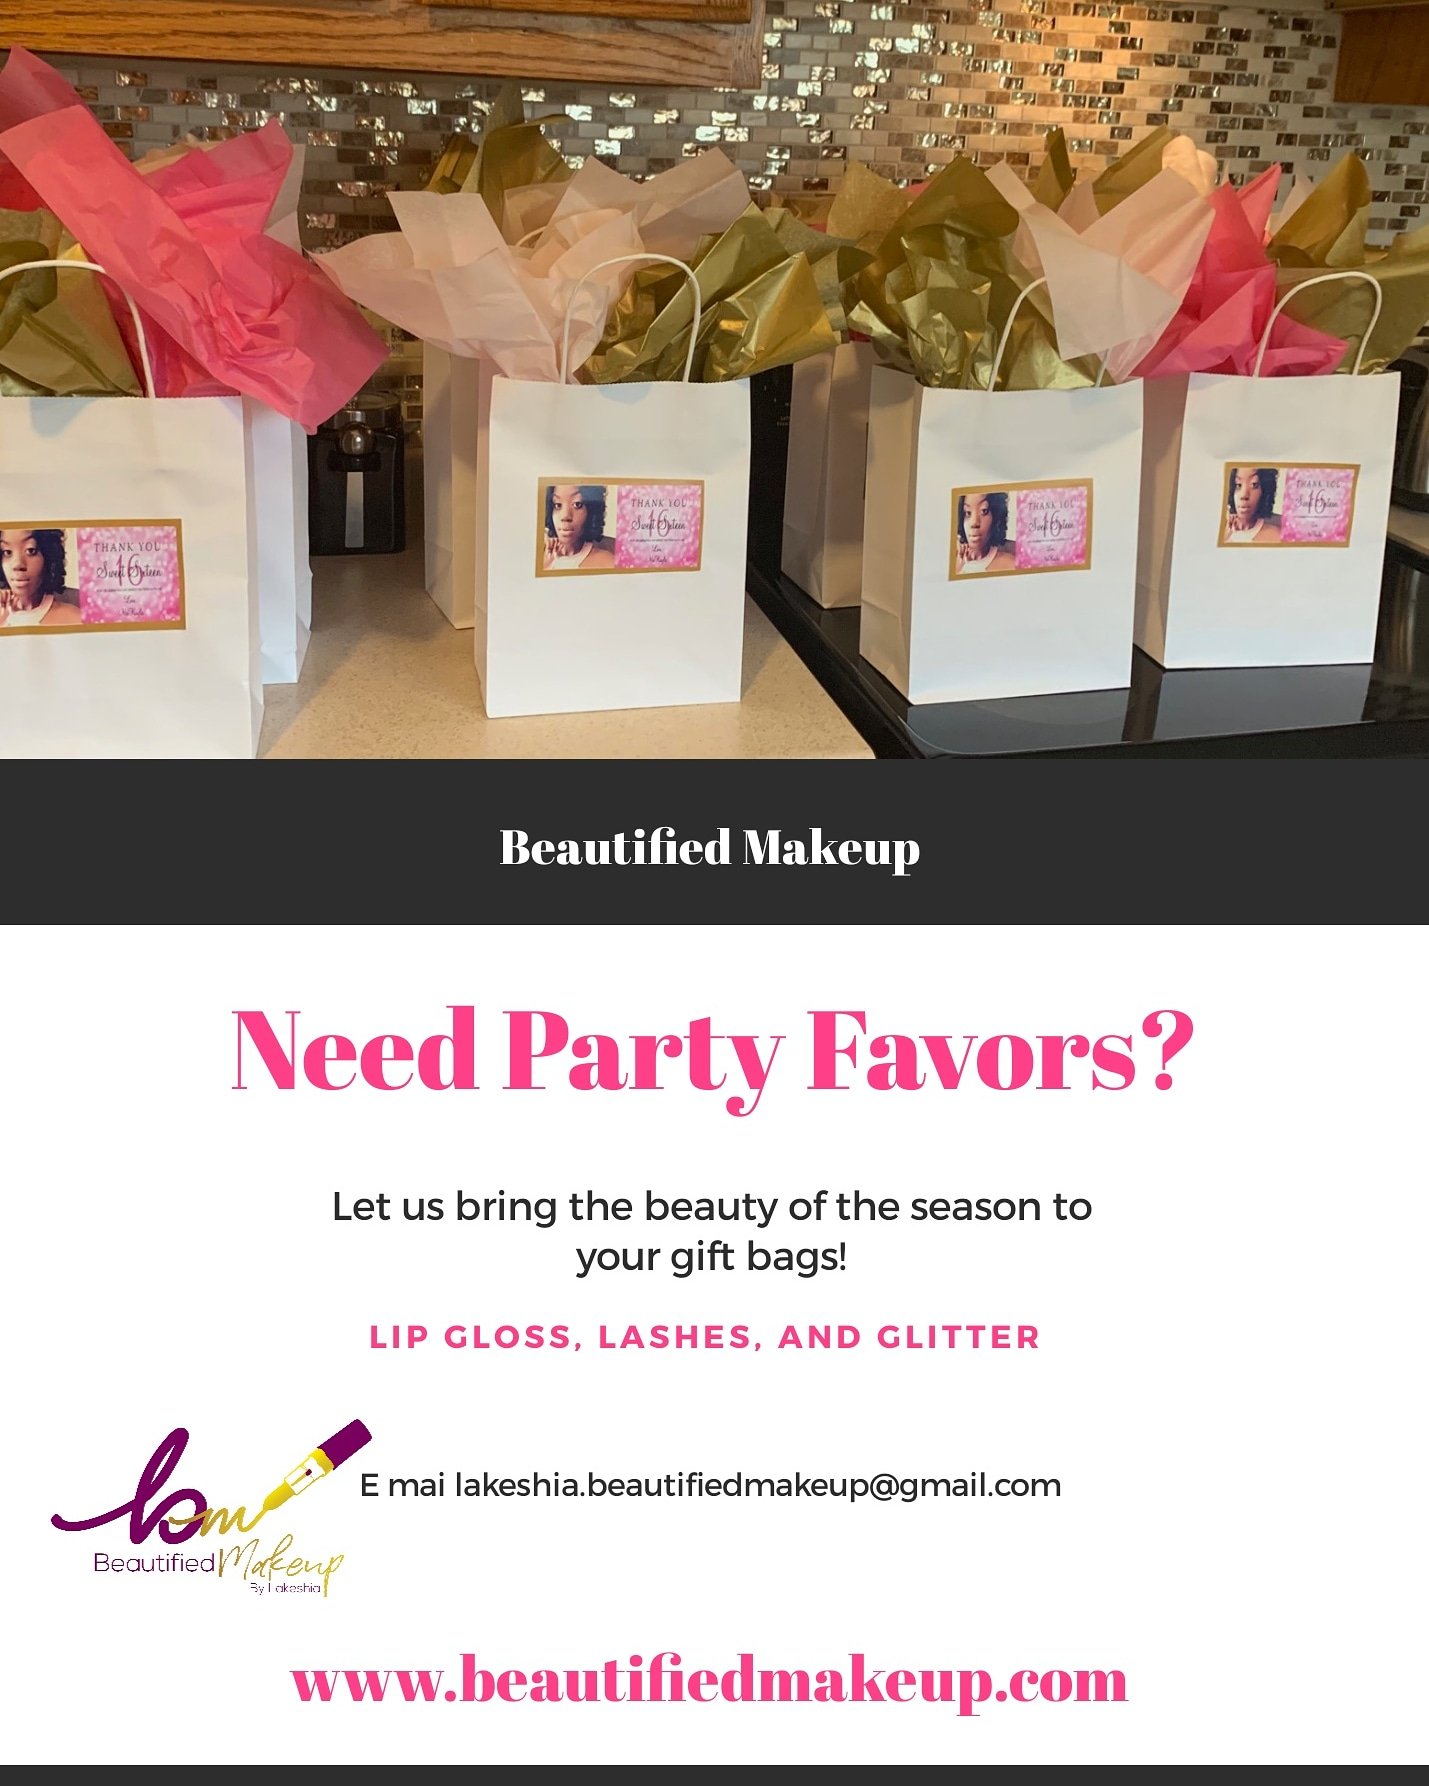 Image of Party favor package 